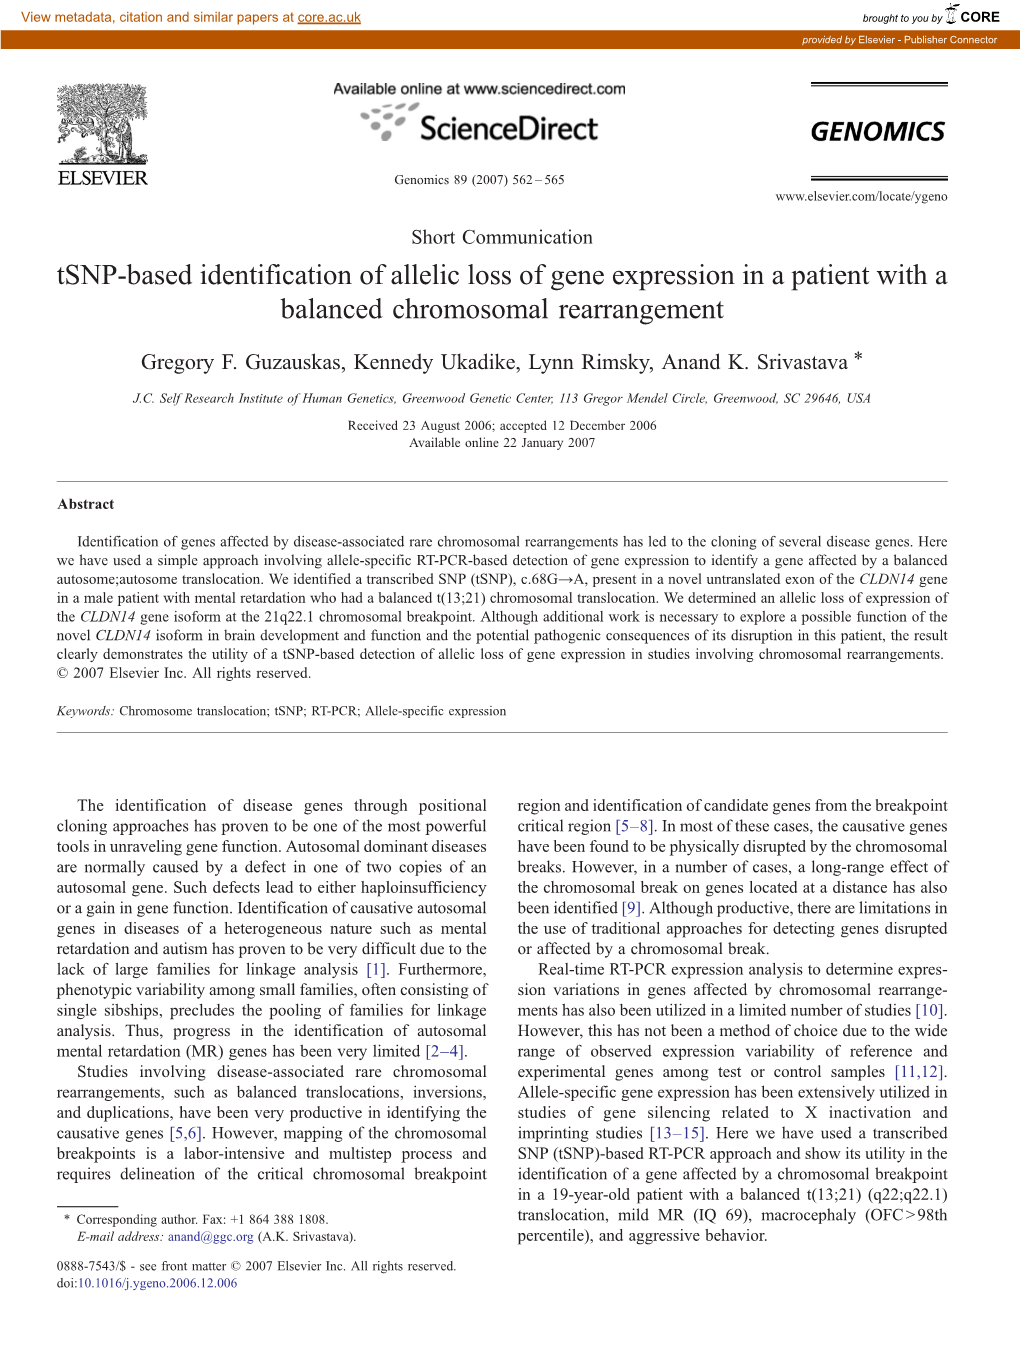 Tsnp-Based Identification of Allelic Loss of Gene Expression in a Patient with a Balanced Chromosomal Rearrangement ⁎ Gregory F